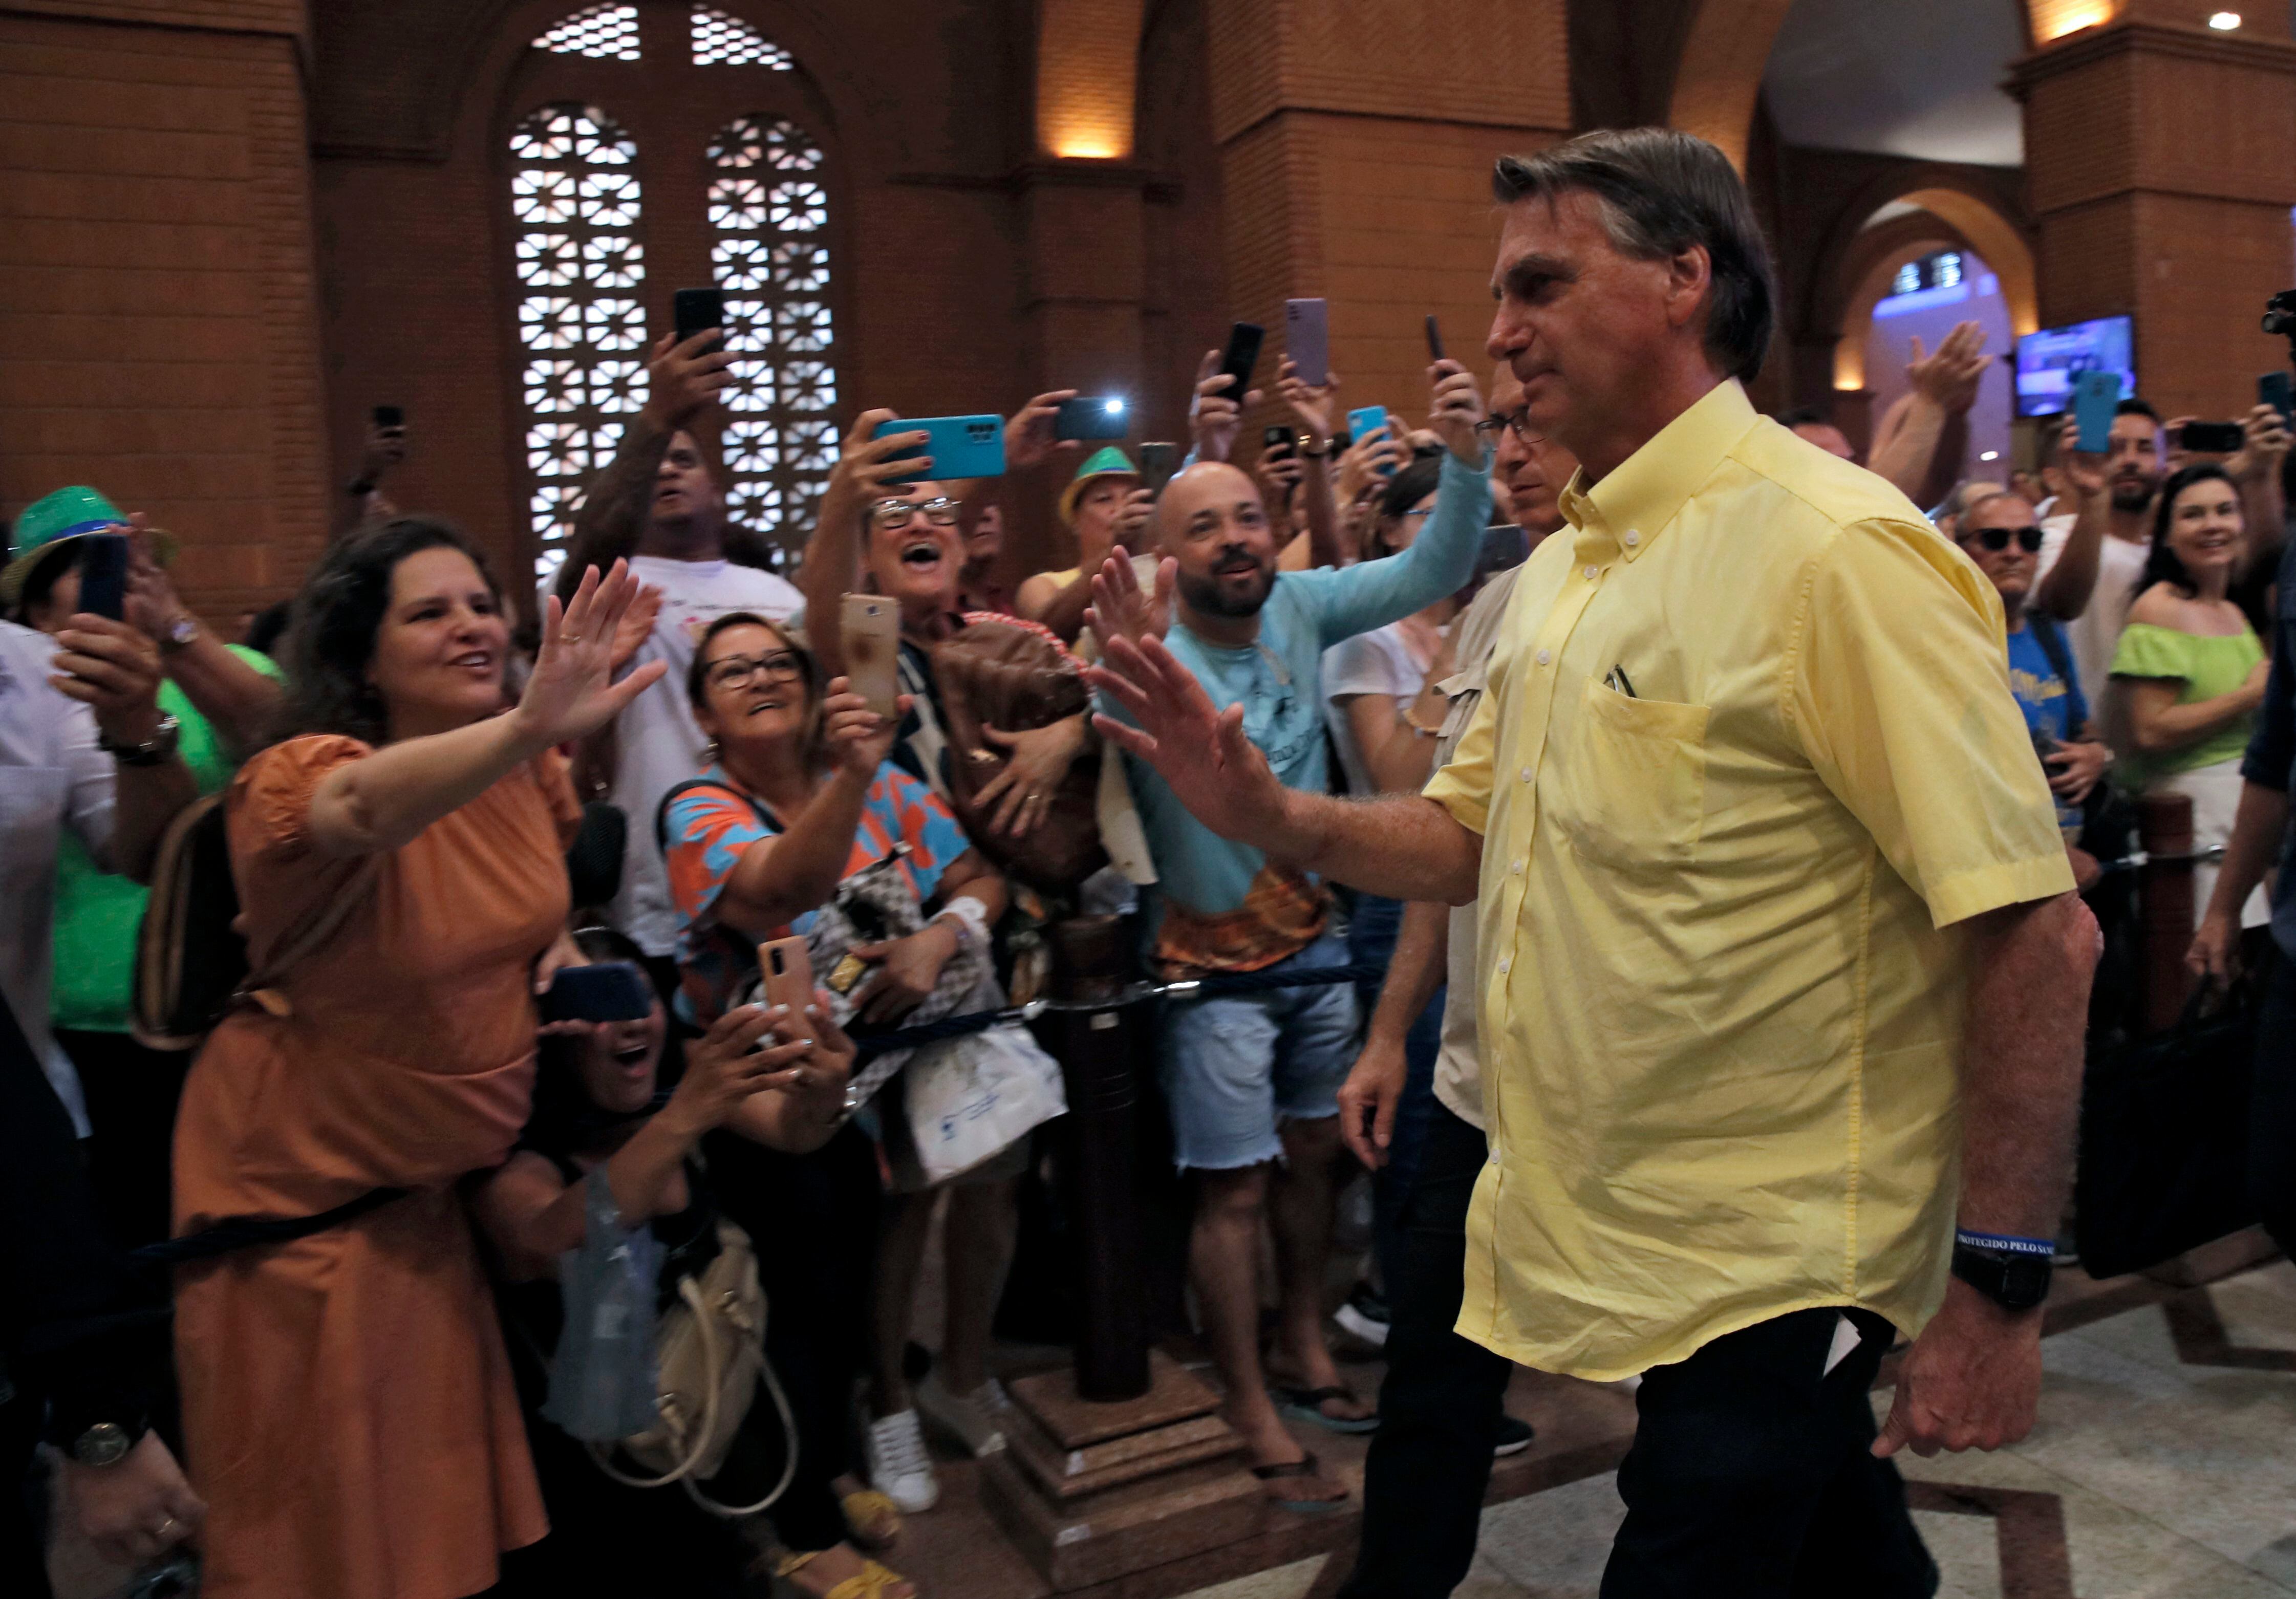 Brazilian President and re-election candidate Jair Bolsonaro is greeted by supporters as he arrives for a mass at the Basilica Cathedral of the National Shrine of Our Lady of Aparecida on Brazil's patron saint's day, in Aparecida, Sao Paulo state, in October.  January 12, 2022. (Photo by Caio GUATELLI / AFP)